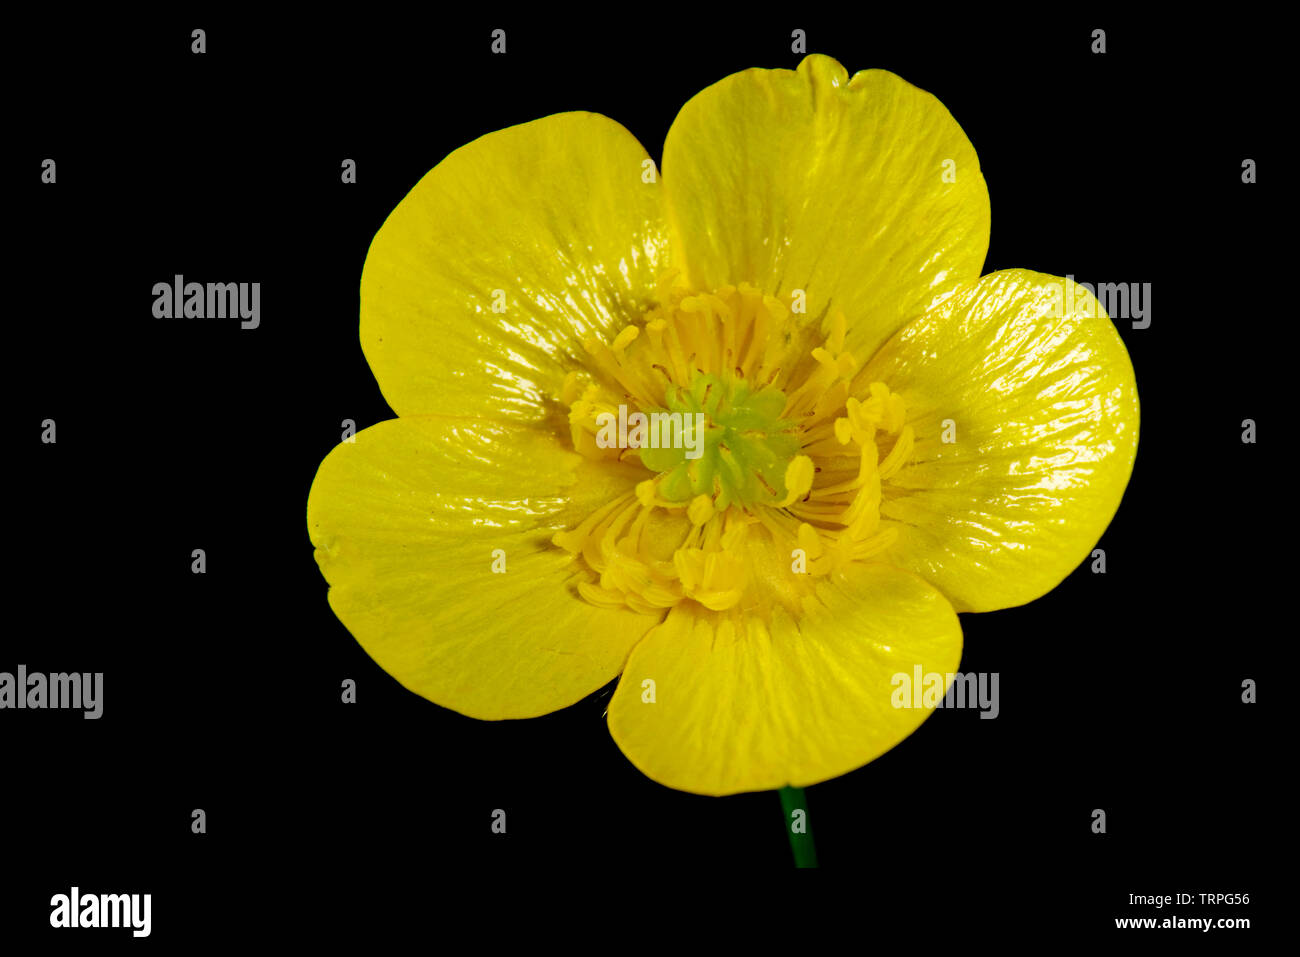 Flower of a yellow meadow buttercup, Ranunculus acris, showing its structure against a black background Stock Photo